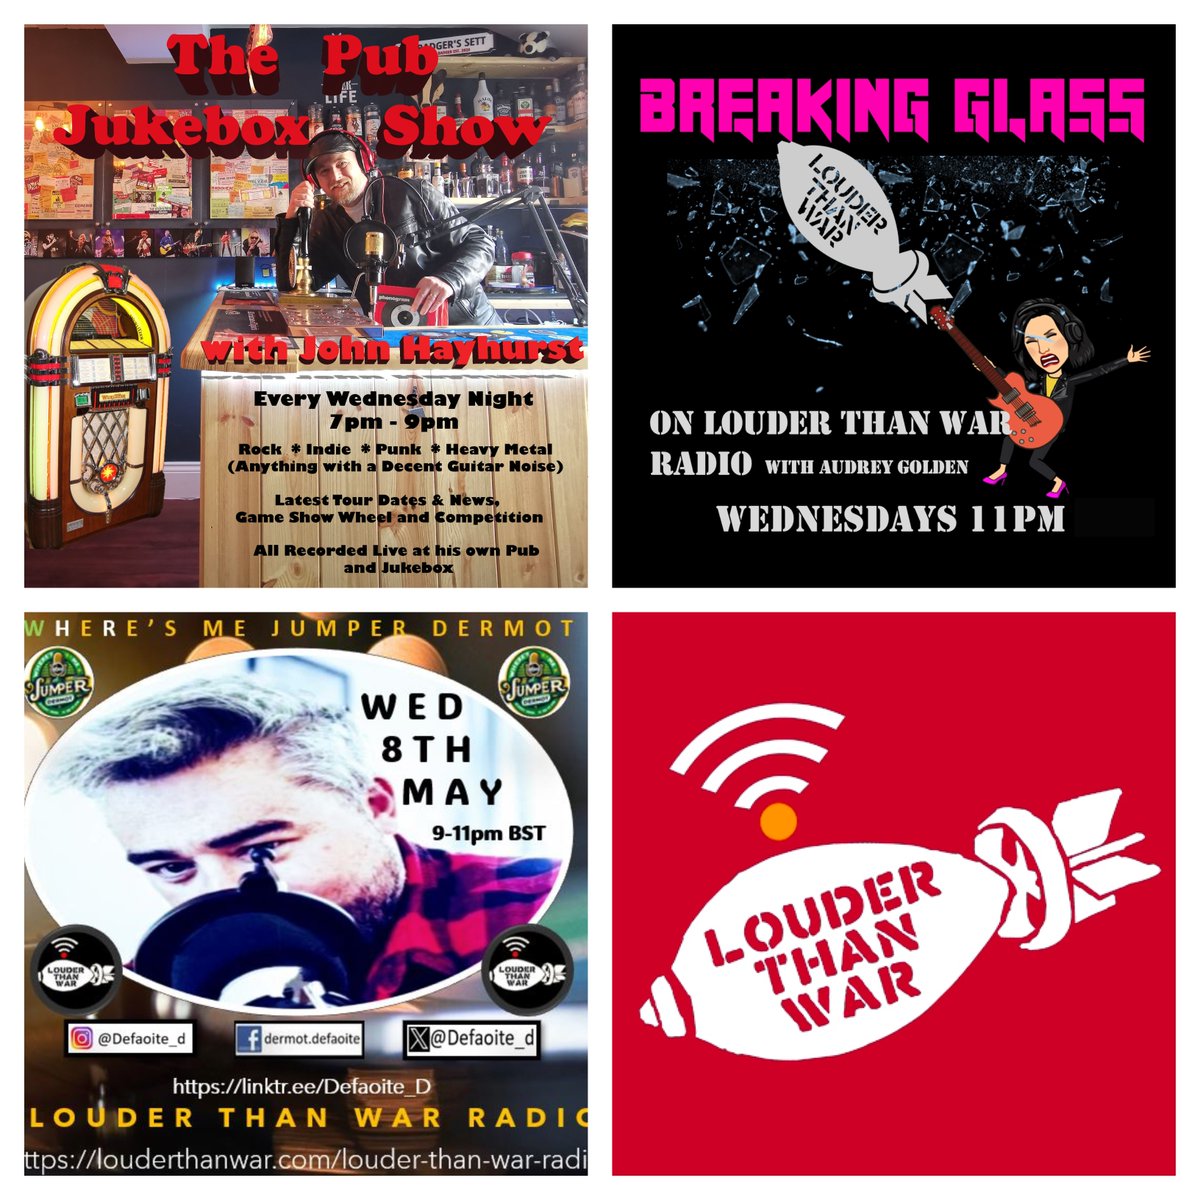 Tonight on Louder Than War Radio s2.radio.co/sab795a38d/lis… 7pm — The Pub Jukebox Show with John Hayhurst 9pm — Where’s Me Jumper Dermot @DEFAOITE_D 11pm — Breaking Glass with Audrey Golden